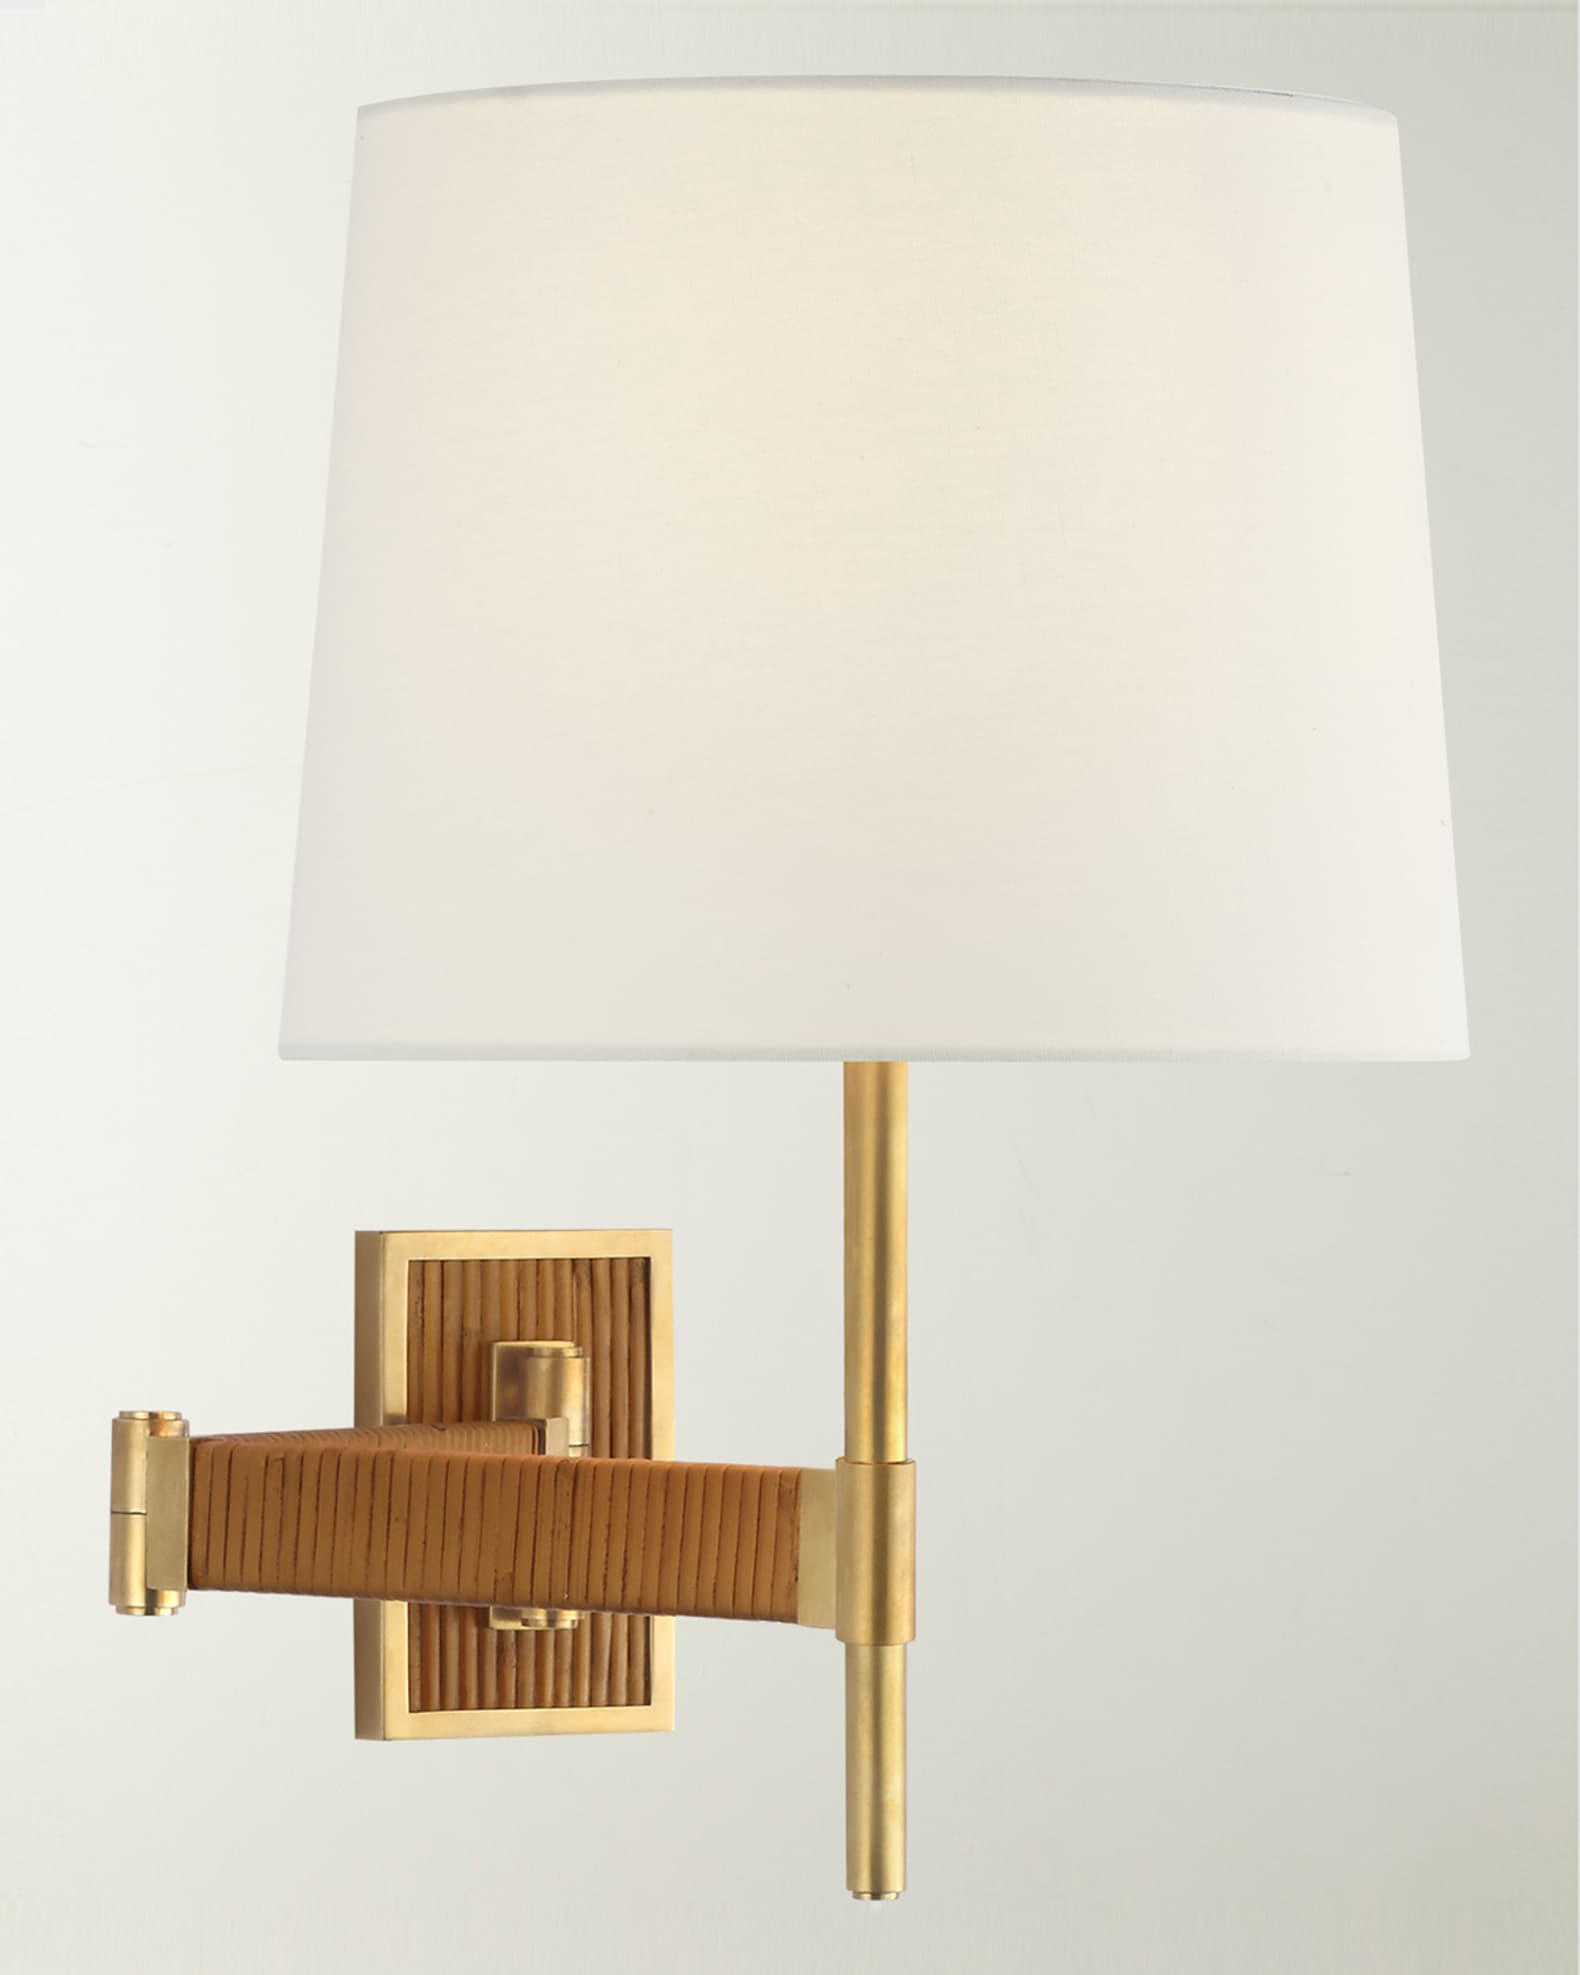 Visual Comfort Signature Elle Swing Arm Sconce In Hand-Rubbed Antique Brass  And Dark Rattan With Linen Shade By Suzanne Kasler